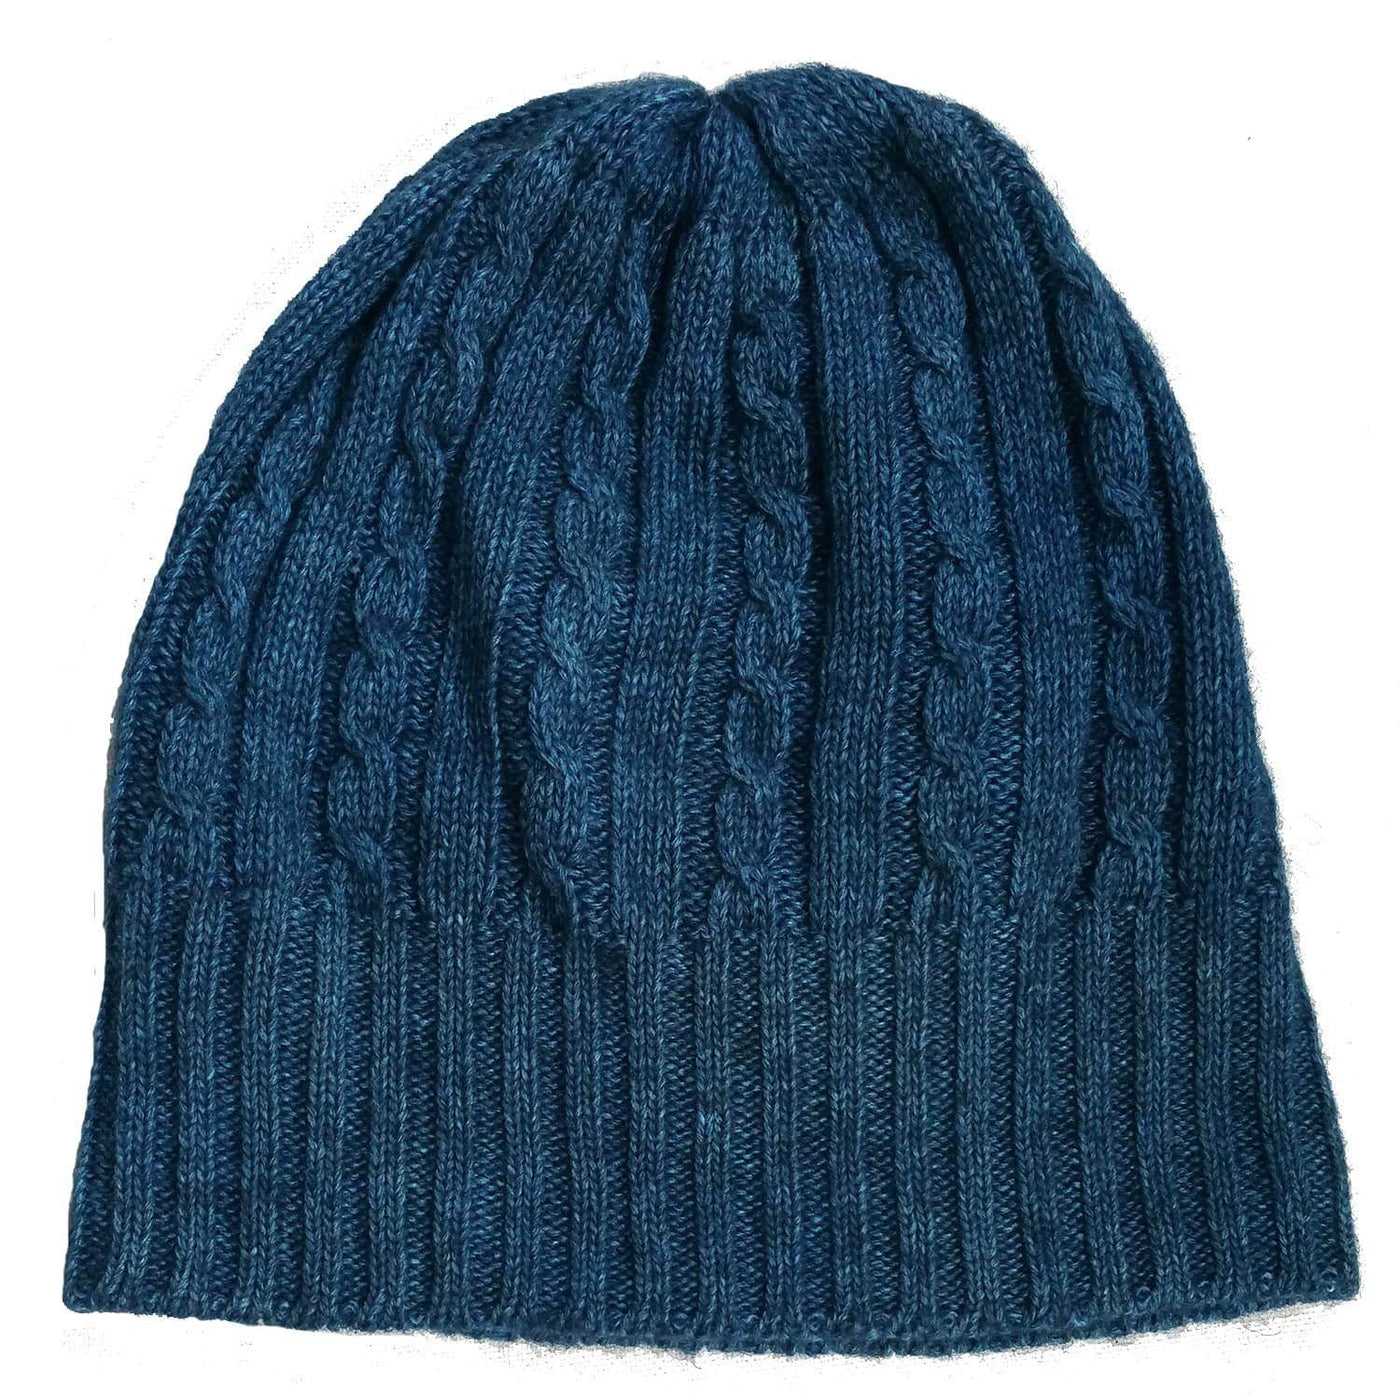 Cabled Bison/Silk Knitted Hat Bison Gear The Buffalo Wool Co. Blue 